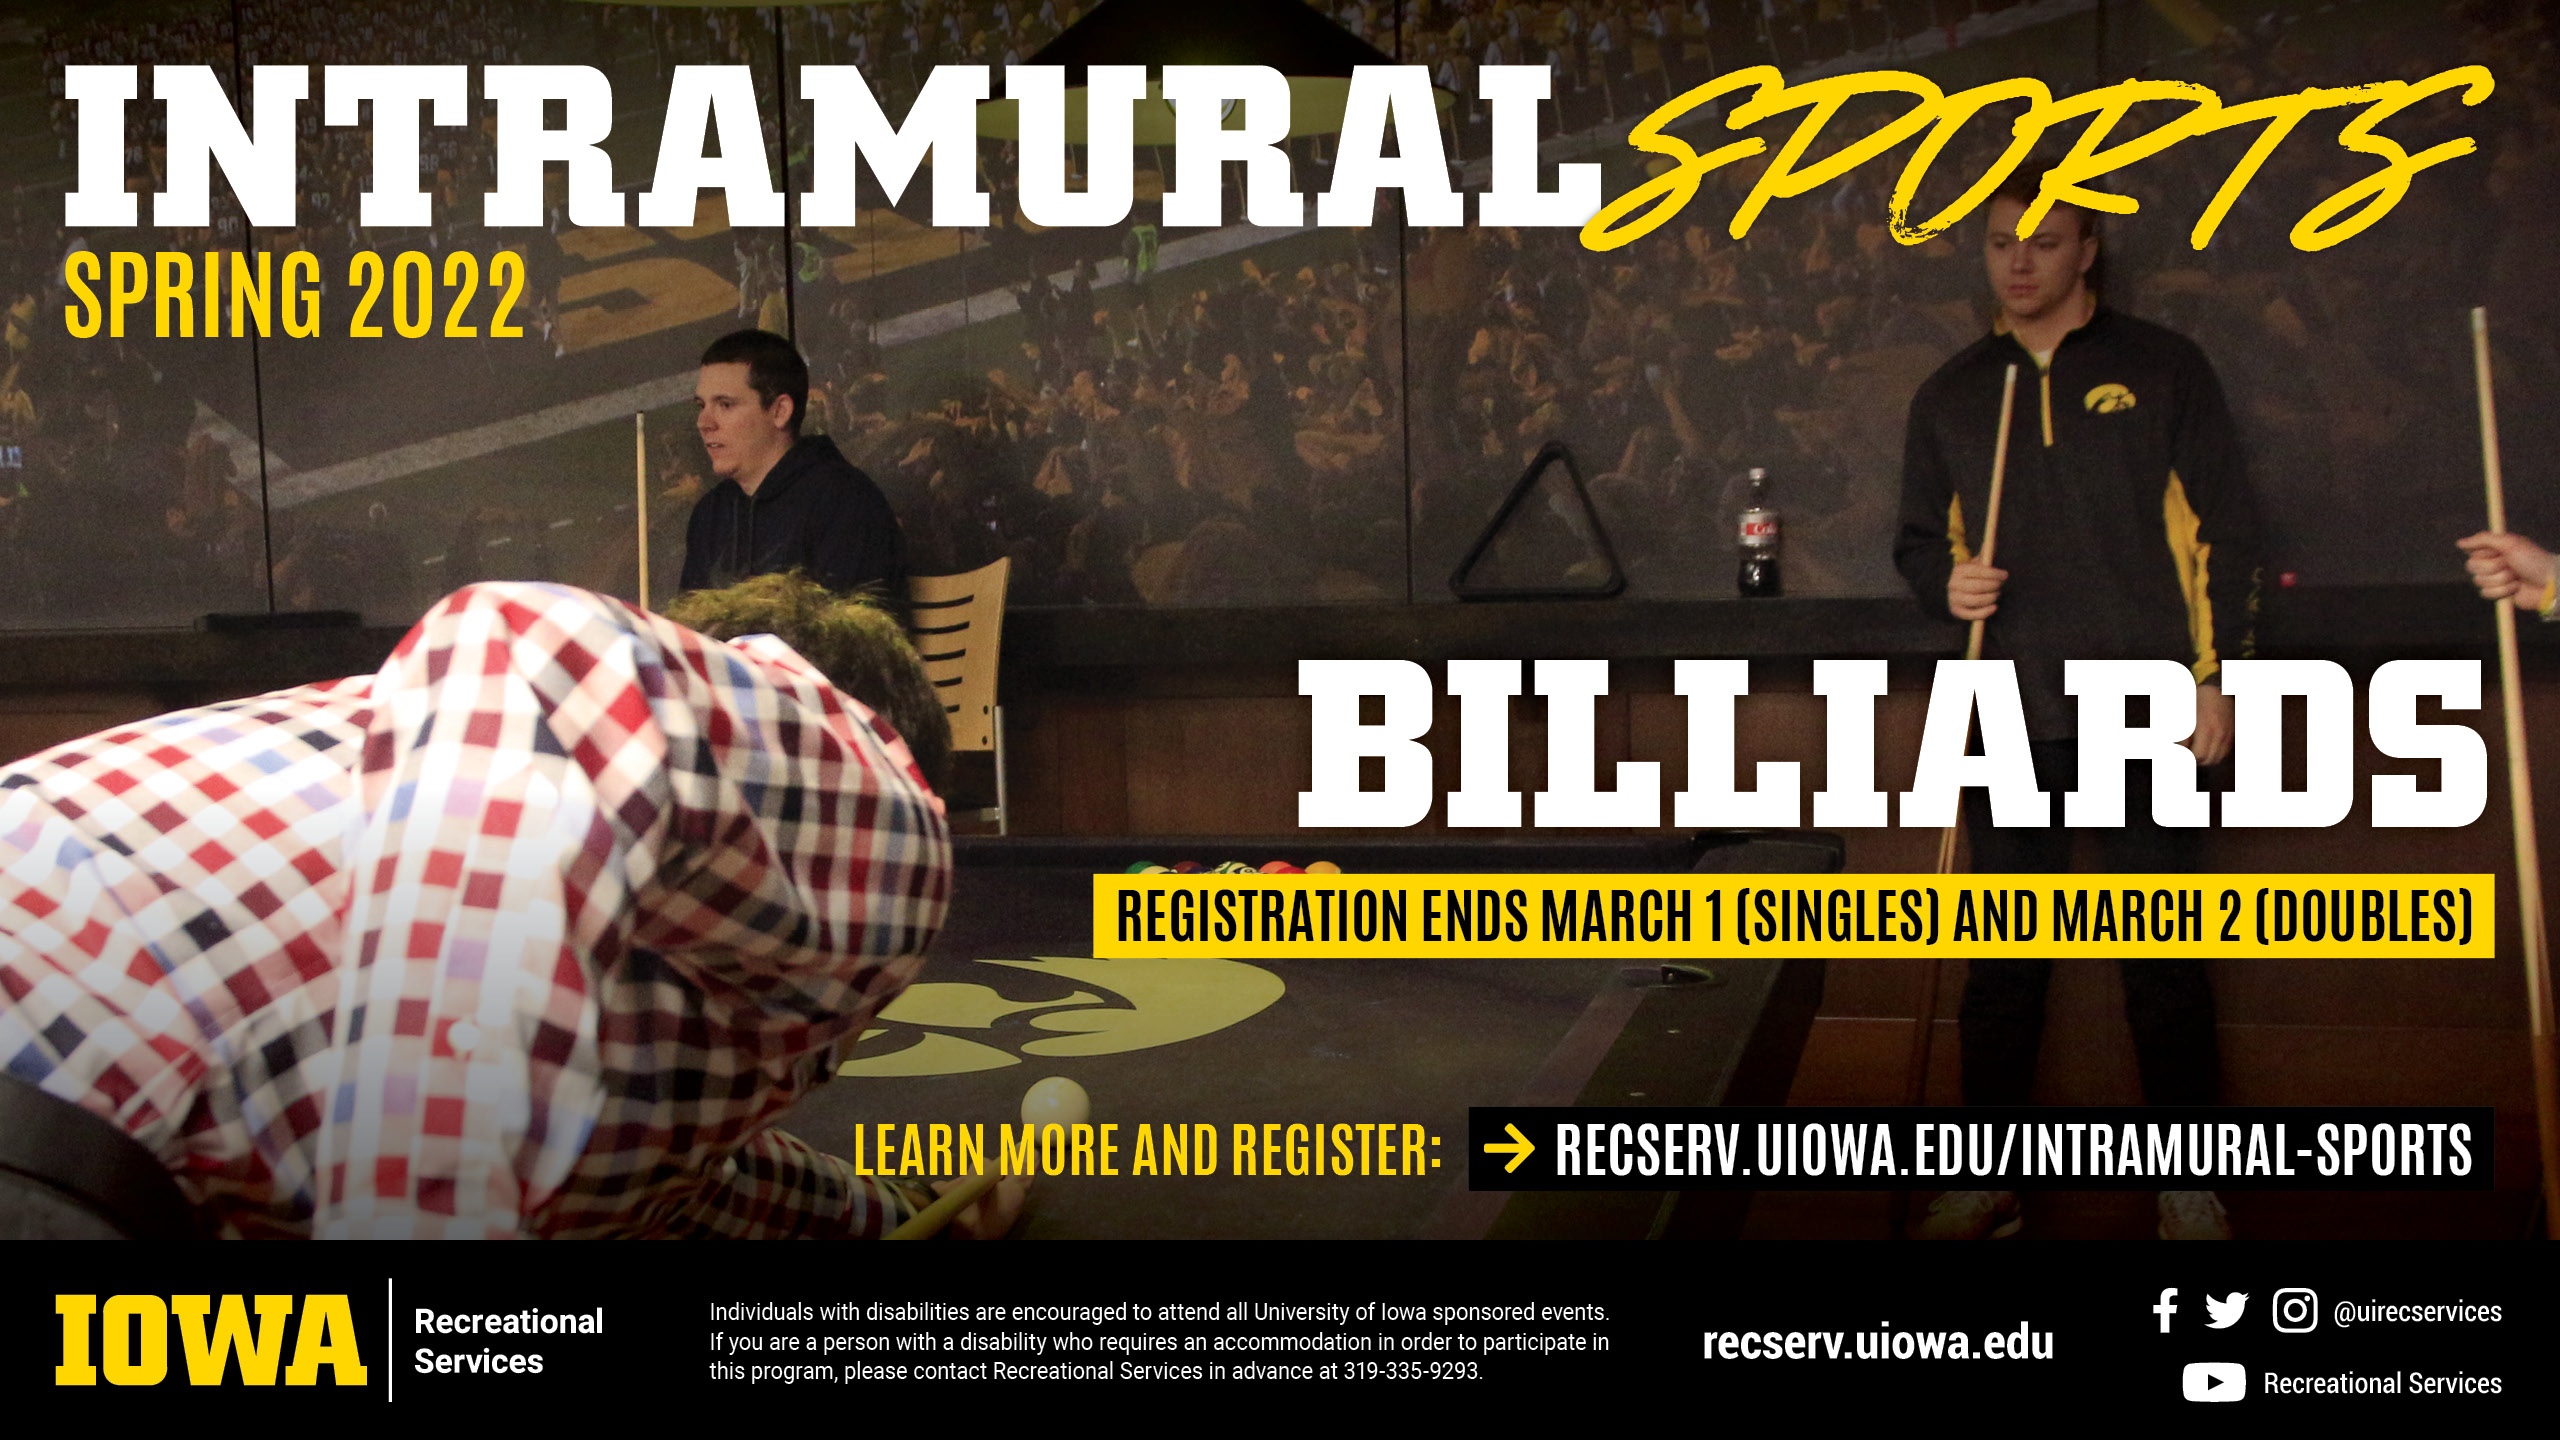 Intramural Sports Spring 2022 Billiards Registration ends March 1 (Singles) and March 2 (Doubles) learn more and register at: recserv.uiowa.edu/intramural-sports